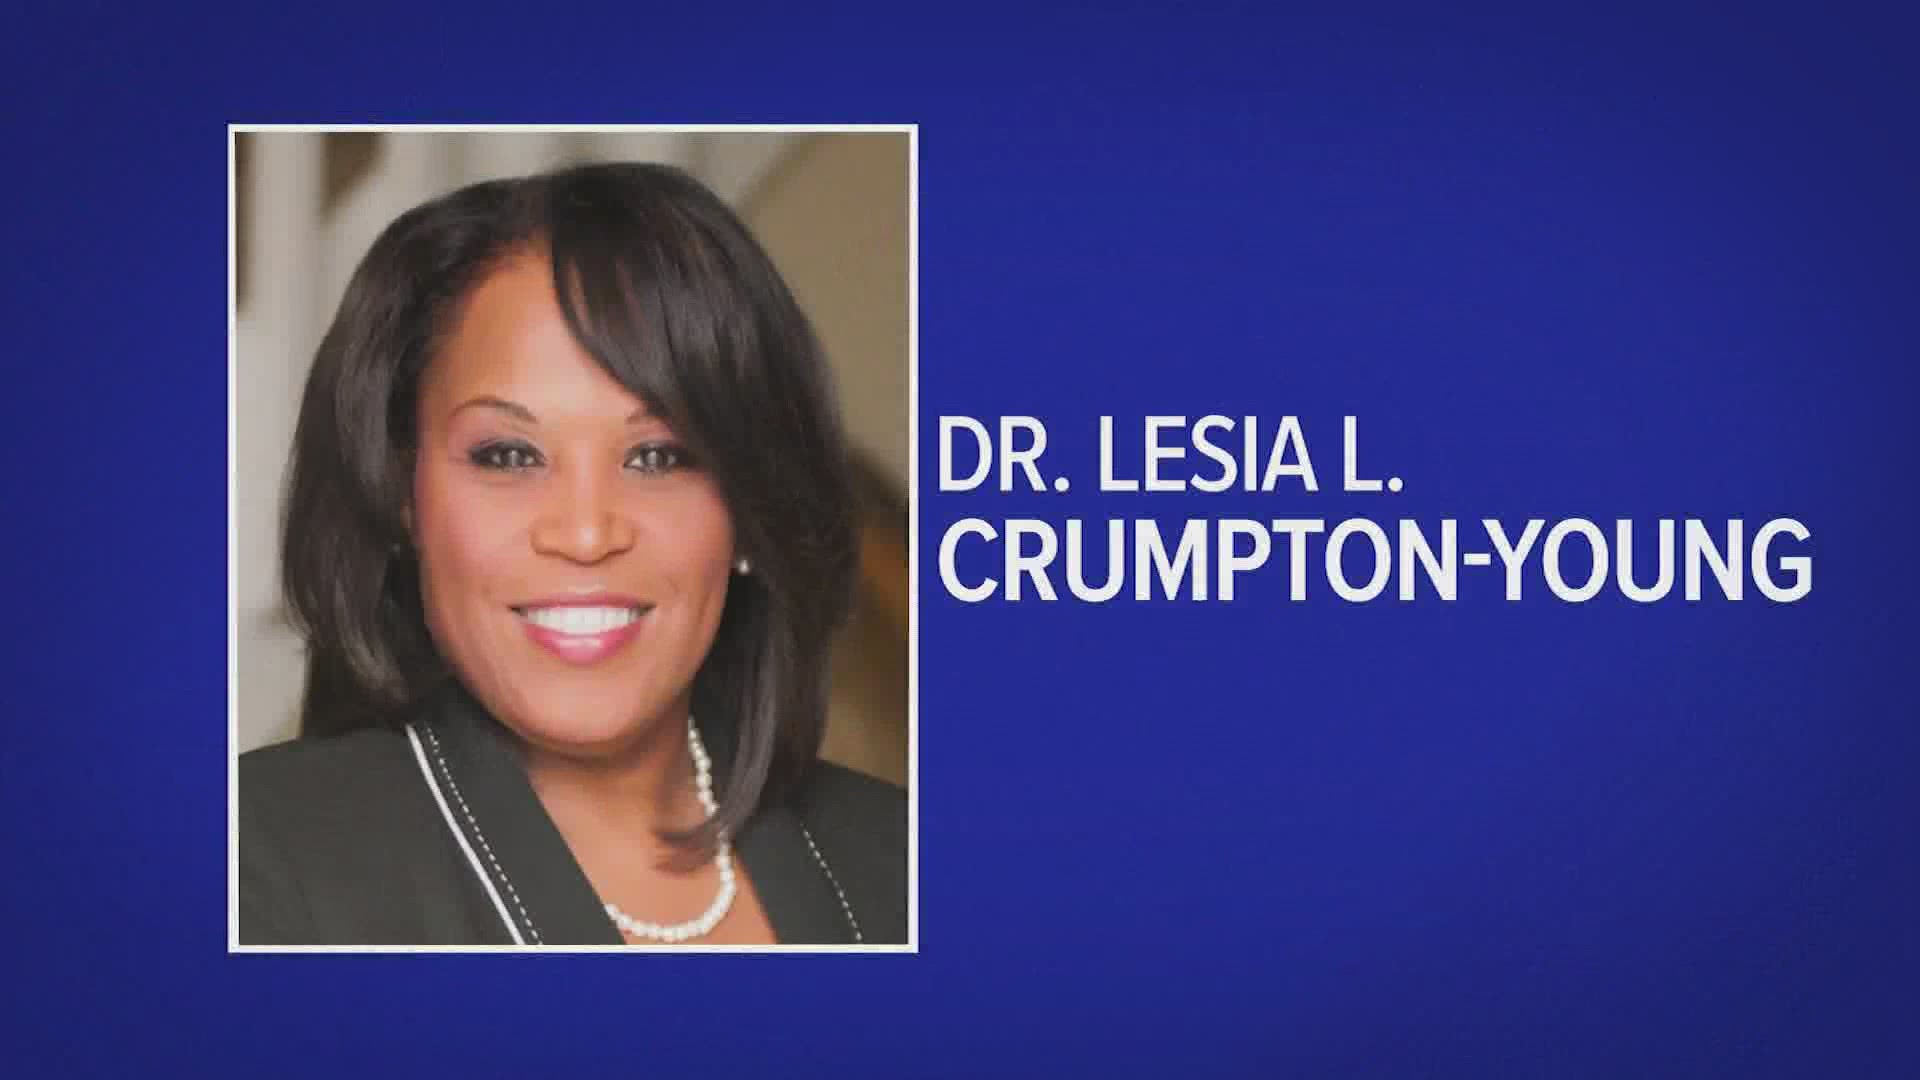 The Texas Southern University Board of Regents on Saturday named Dr. Lesia L. Crumpton-Young its sole finalist for President of the university.